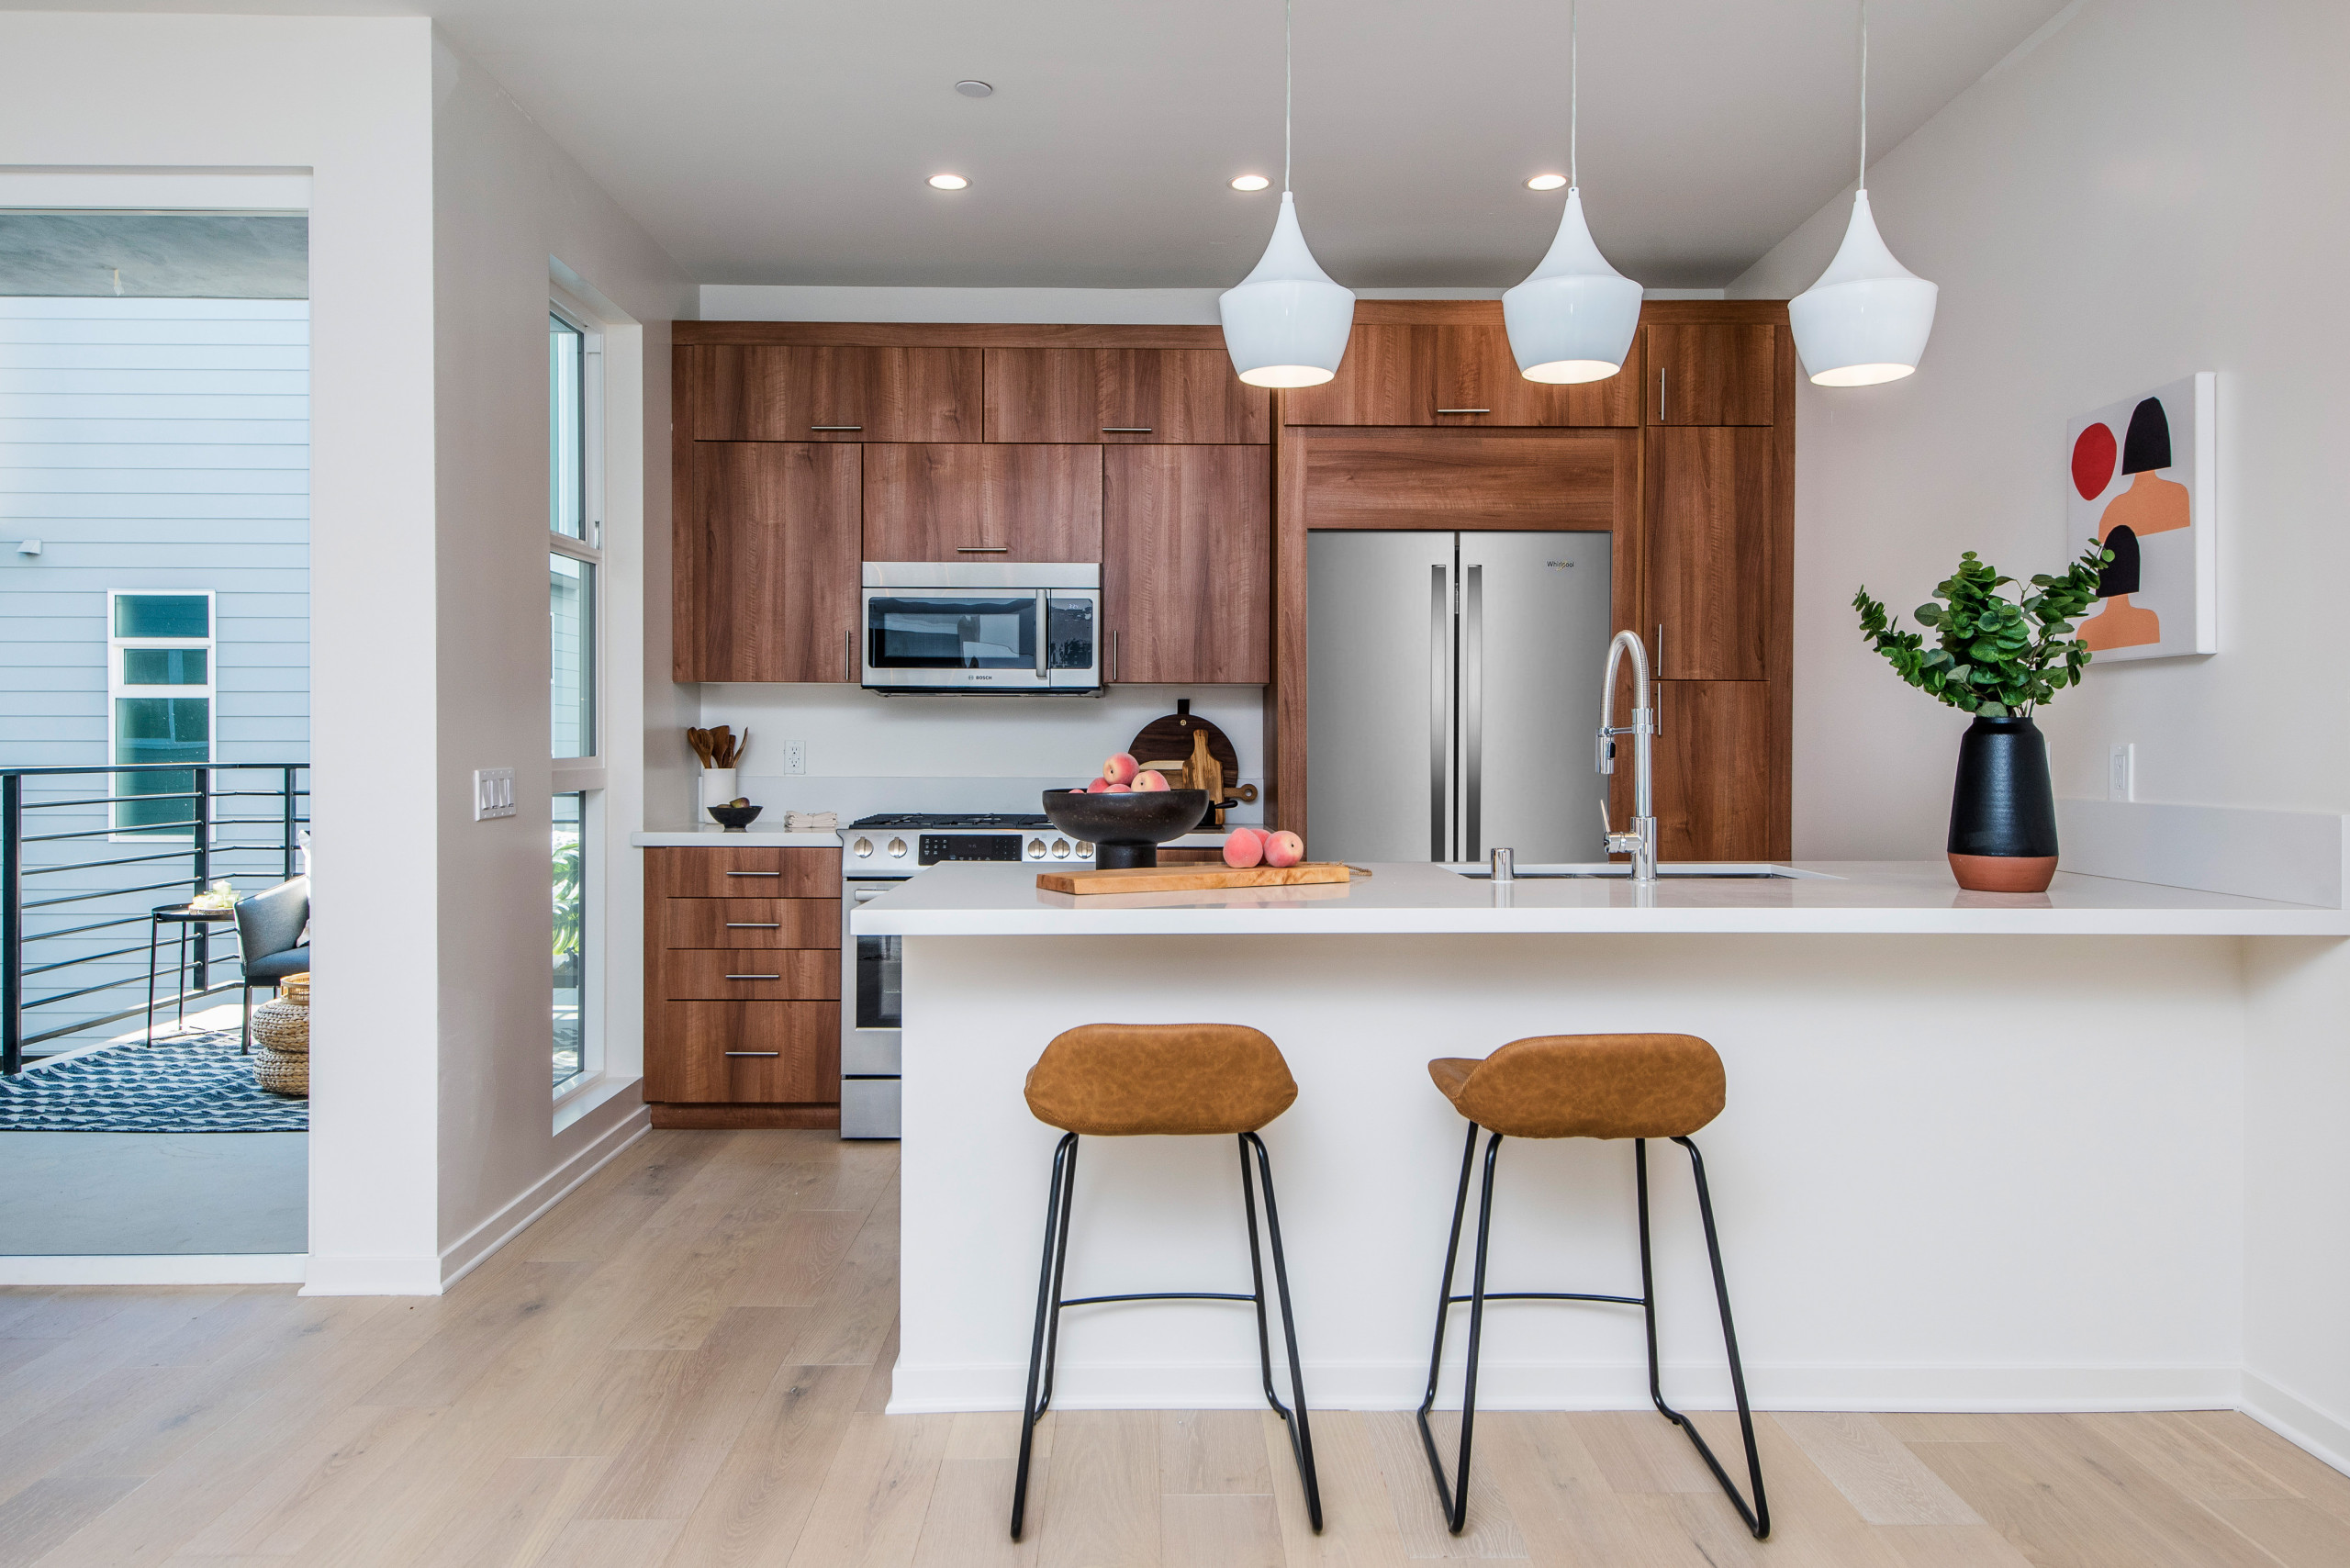 18 Kitchen with No Island Ideas You'll Love   August, 18   Houzz